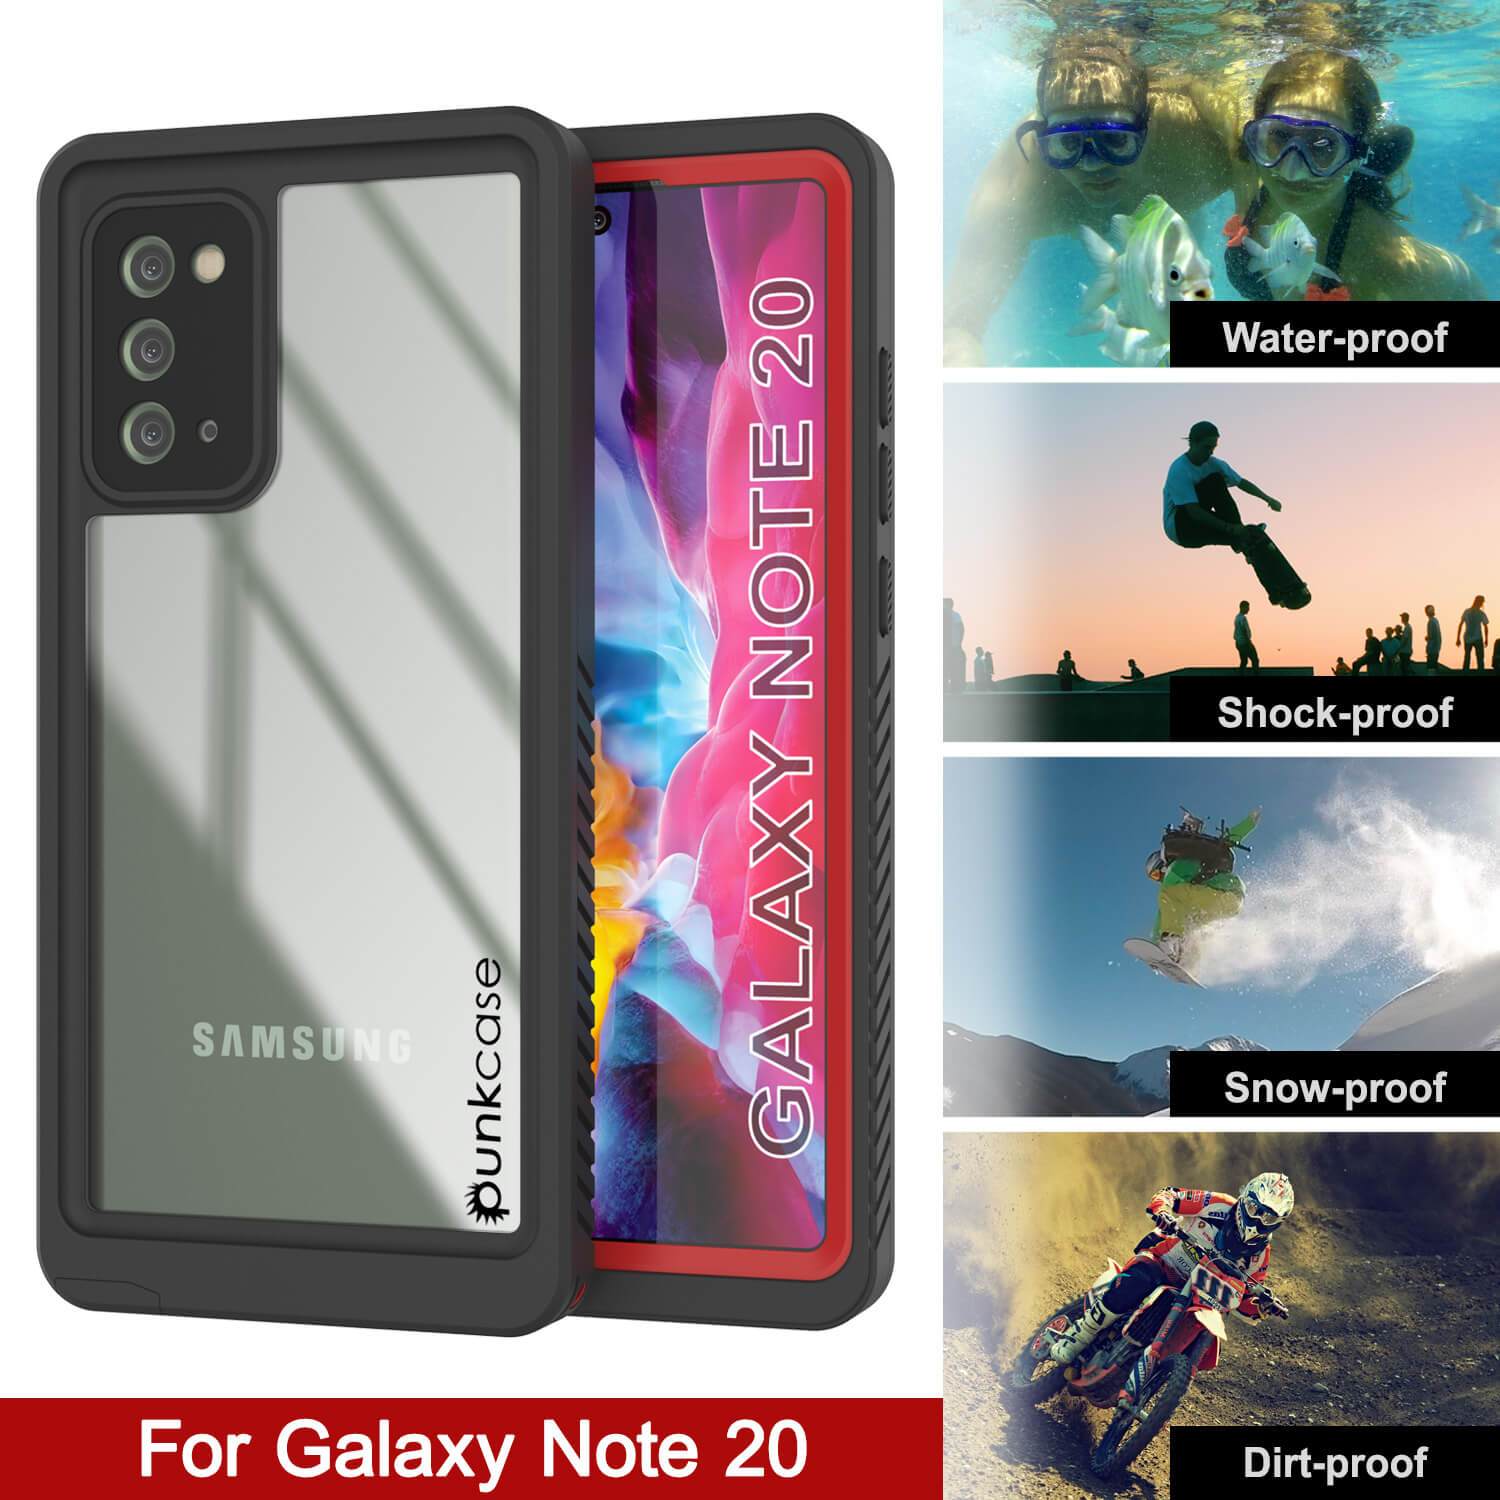 Galaxy Note 20 Case, Punkcase [Extreme Series] Armor Cover W/ Built In Screen Protector [Red]